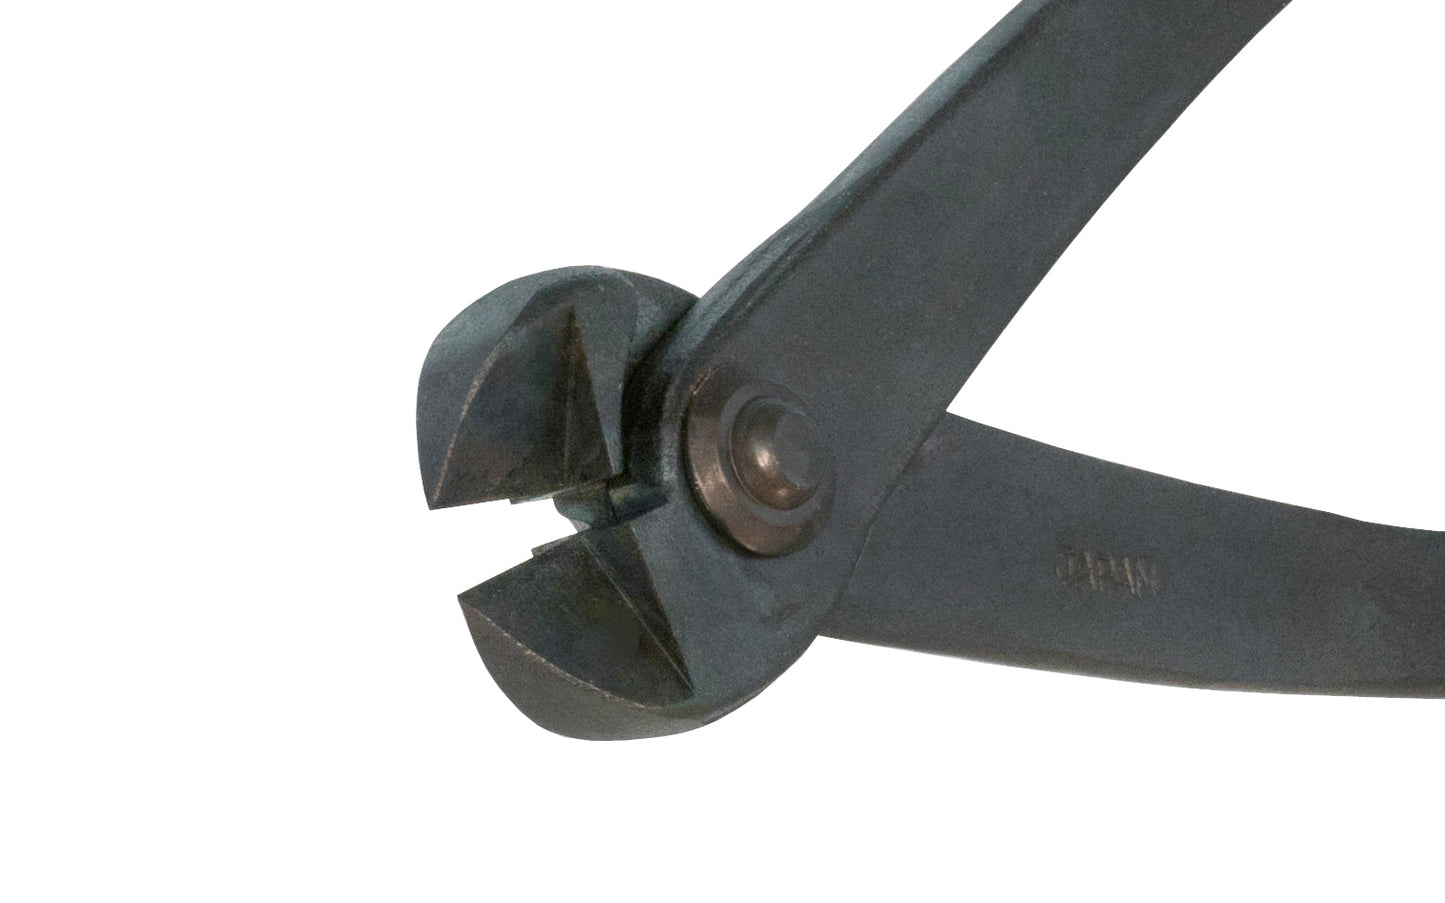 These Japanese Bonsai Wire Cutters are designed specifically for cutting Bonsai wire. The cutters are designed with a rounded head to prevent damaging the branch & with jaws that cut the wire symmetrically & cleanly. Rounded head wire cutters.  Made in Japan.